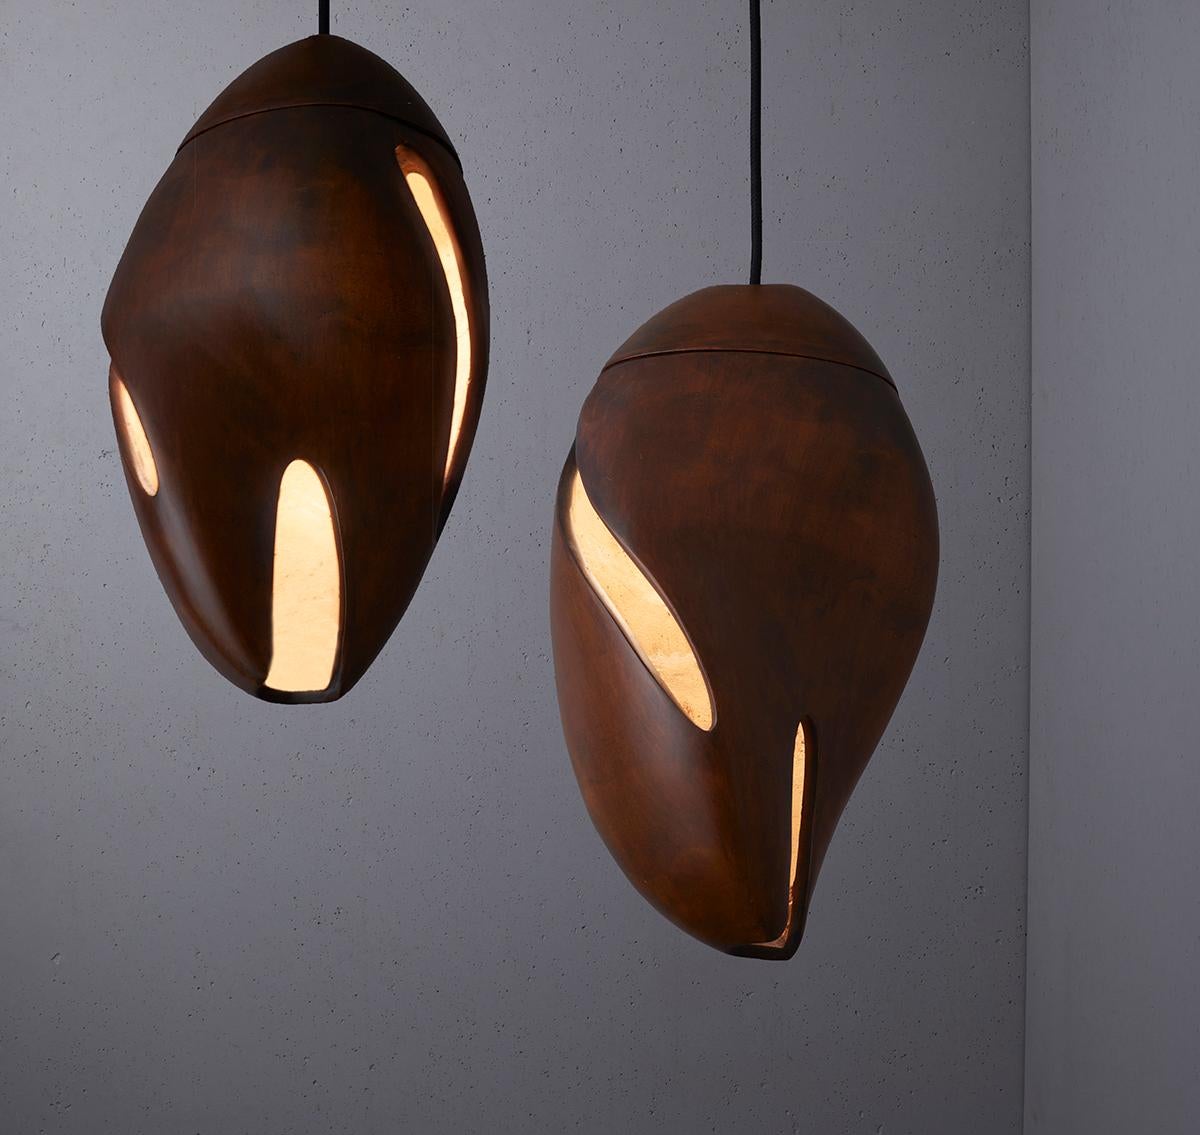 Cocoon is a 3D printed decorative lamp celebrating craft and pushing the boundaries of new and
sustainable technologies by transforming wood waste into an organic, technologically advanced
light. 

The sculptural form of Cocoon has been developed to